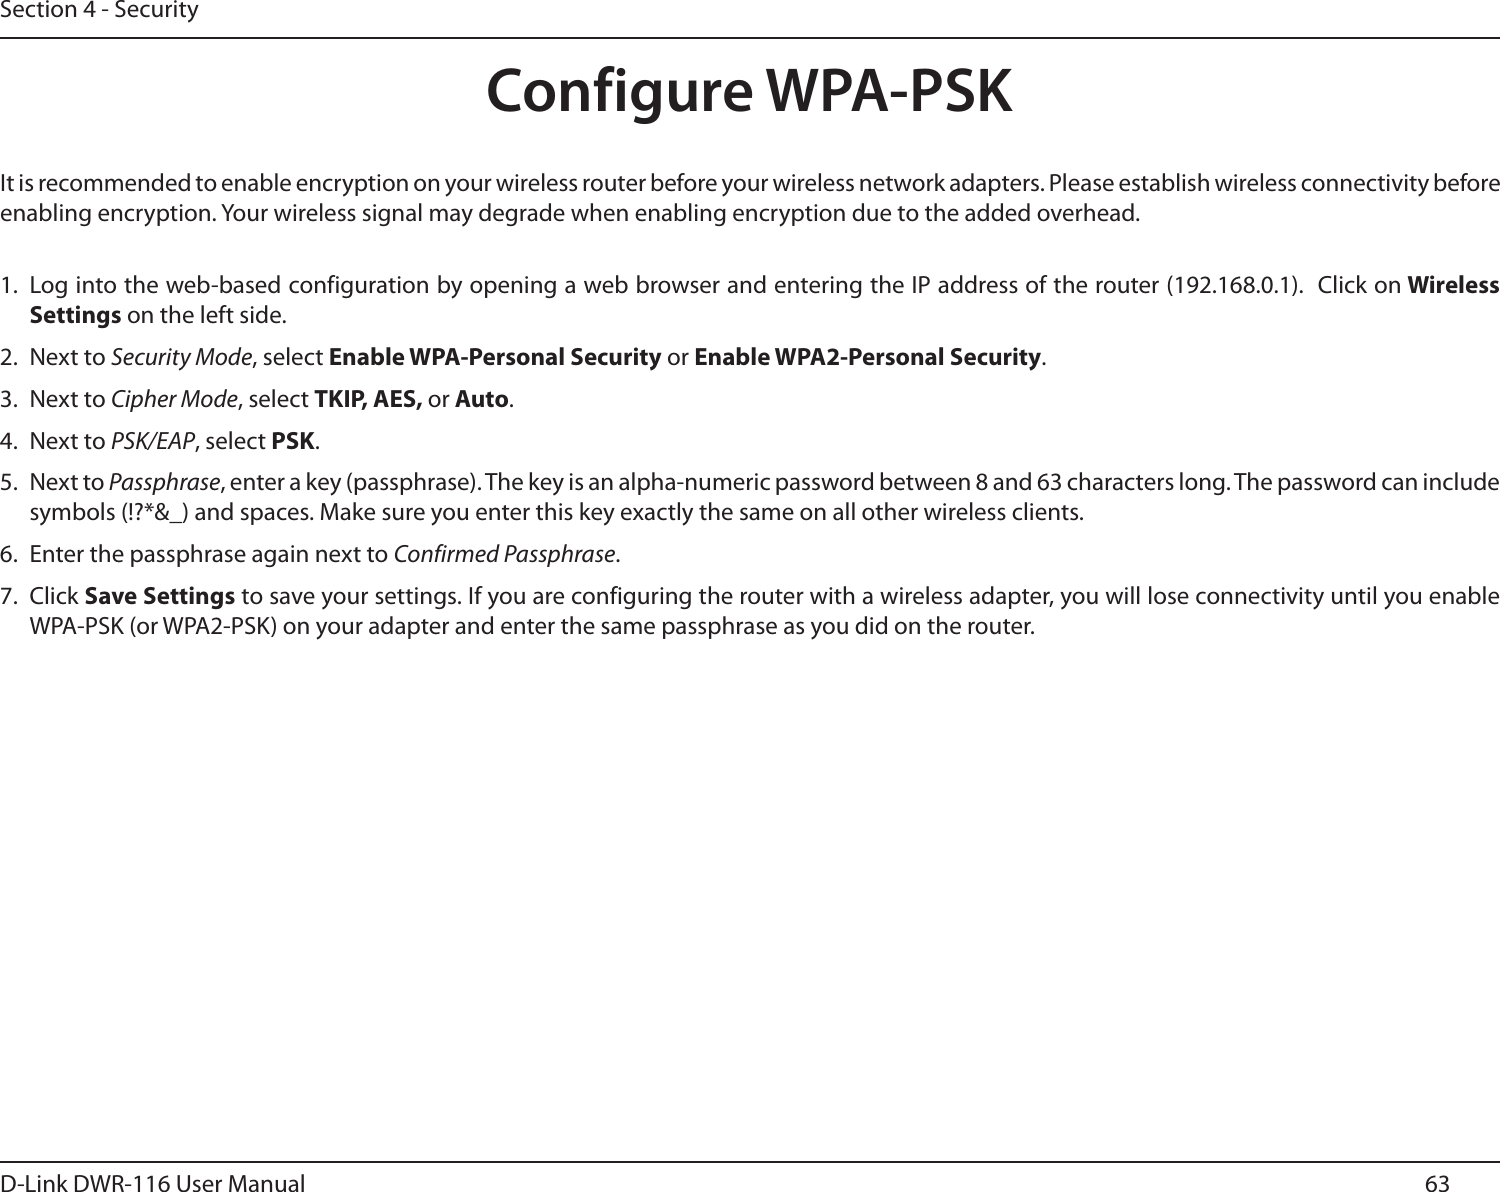 63D-Link DWR-116 User ManualSection 4 - SecurityConfigure WPA-PSKIt is recommended to enable encryption on your wireless router before your wireless network adapters. Please establish wireless connectivity before enabling encryption. Your wireless signal may degrade when enabling encryption due to the added overhead.1. Log into the web-based configuration by opening a web browser and entering the IP address of the router (192.168.0.1).  Click on Wireless Settings on the left side.2.  Next to Security Mode, select Enable WPA-Personal Security or Enable WPA2-Personal Security.3.  Next to Cipher Mode, select TKIP, AES, or Auto.4.  Next to PSK/EAP, select PSK.5.  Next to Passphrase, enter a key (passphrase). The key is an alpha-numeric password between 8 and 63 characters long. The password can include symbols (!?*&amp;_) and spaces. Make sure you enter this key exactly the same on all other wireless clients.6.  Enter the passphrase again next to Confirmed Passphrase.7.  Click Save Settings to save your settings. If you are configuring the router with a wireless adapter, you will lose connectivity until you enable WPA-PSK (or WPA2-PSK) on your adapter and enter the same passphrase as you did on the router.